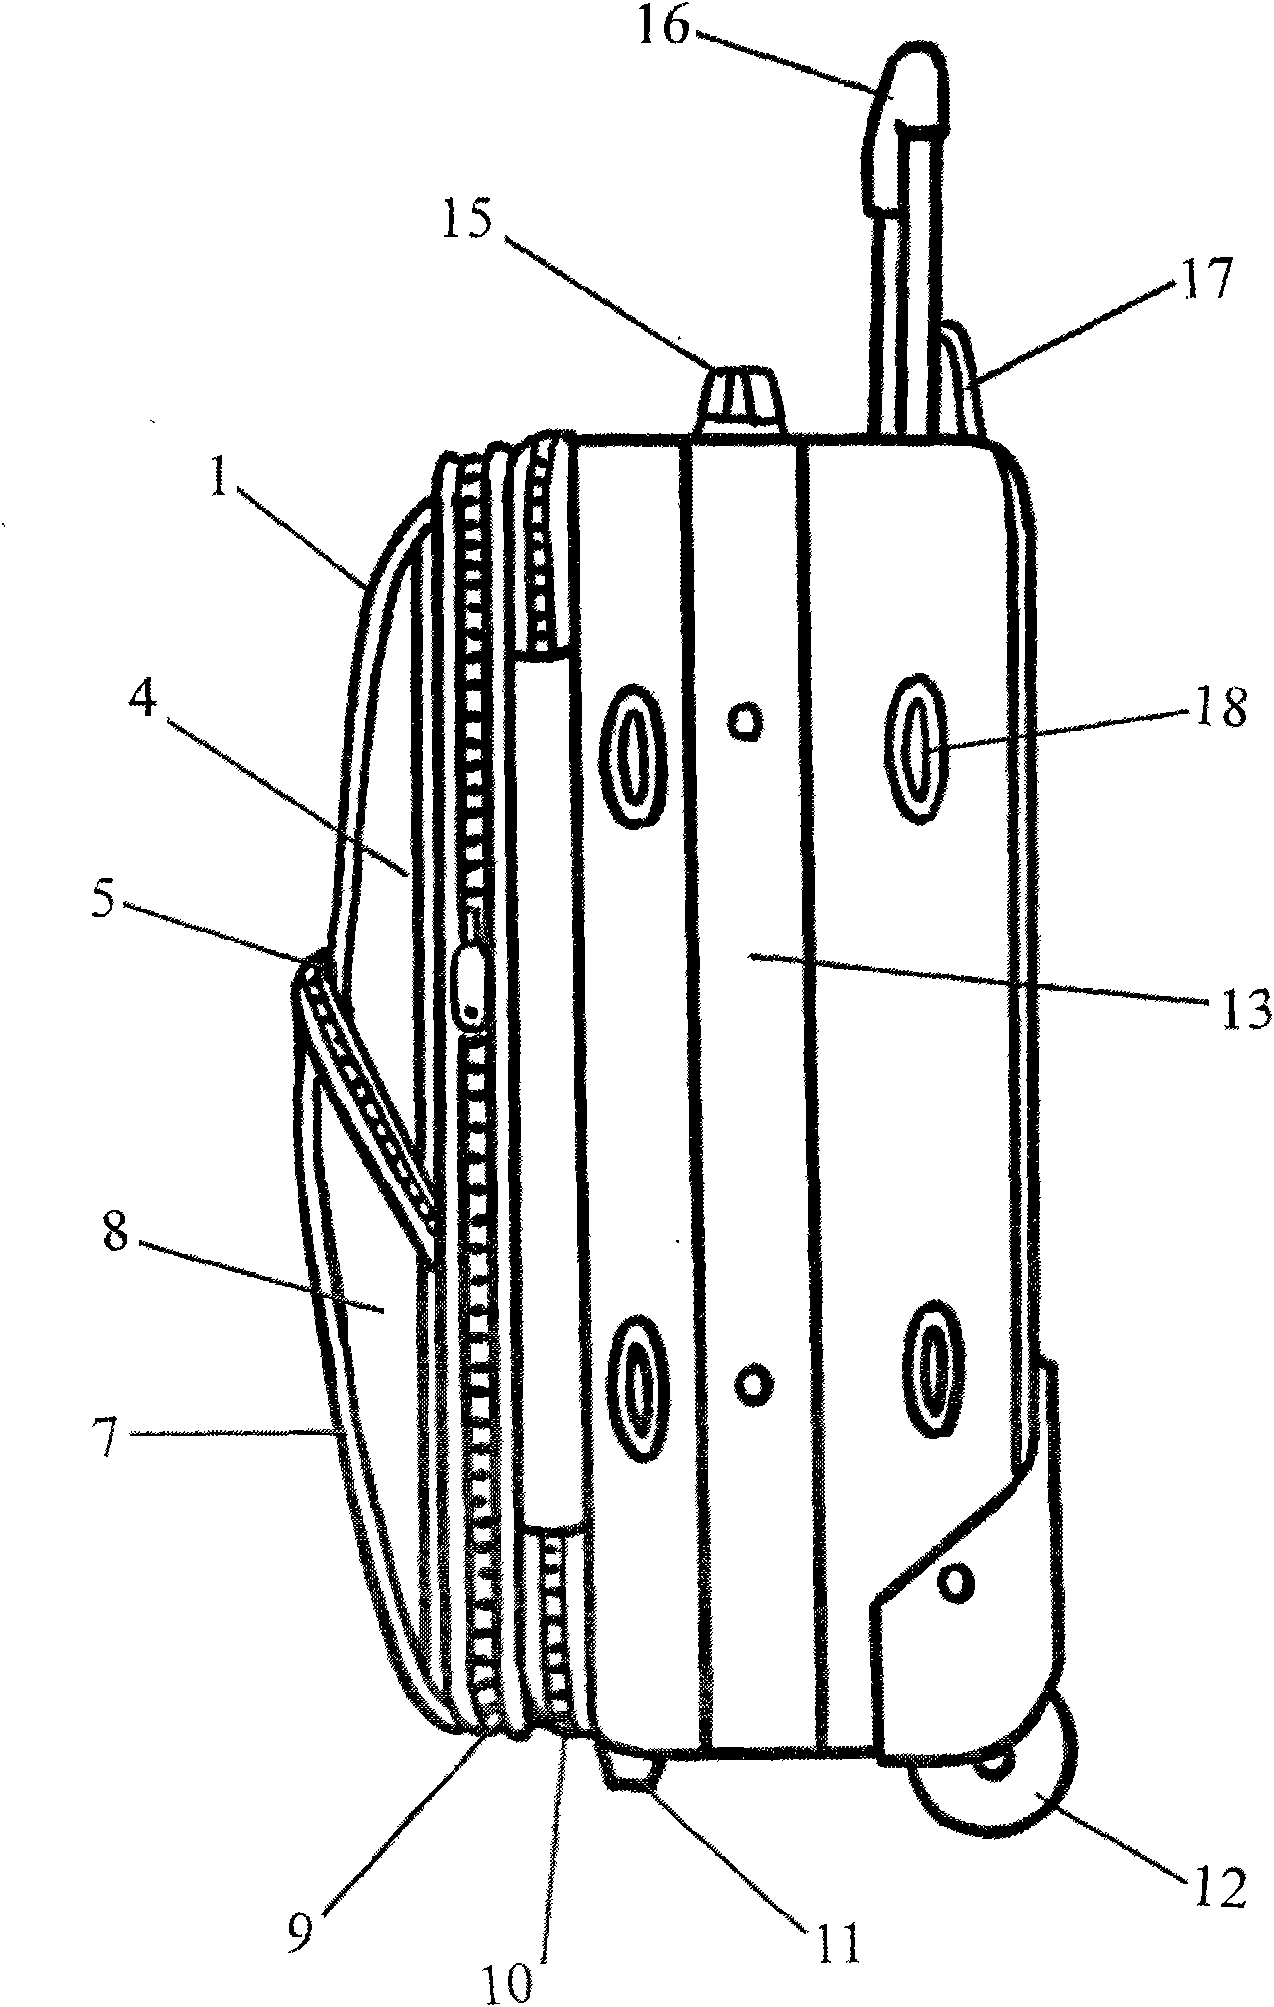 Pull-rod case with convex pocket and storage pocket